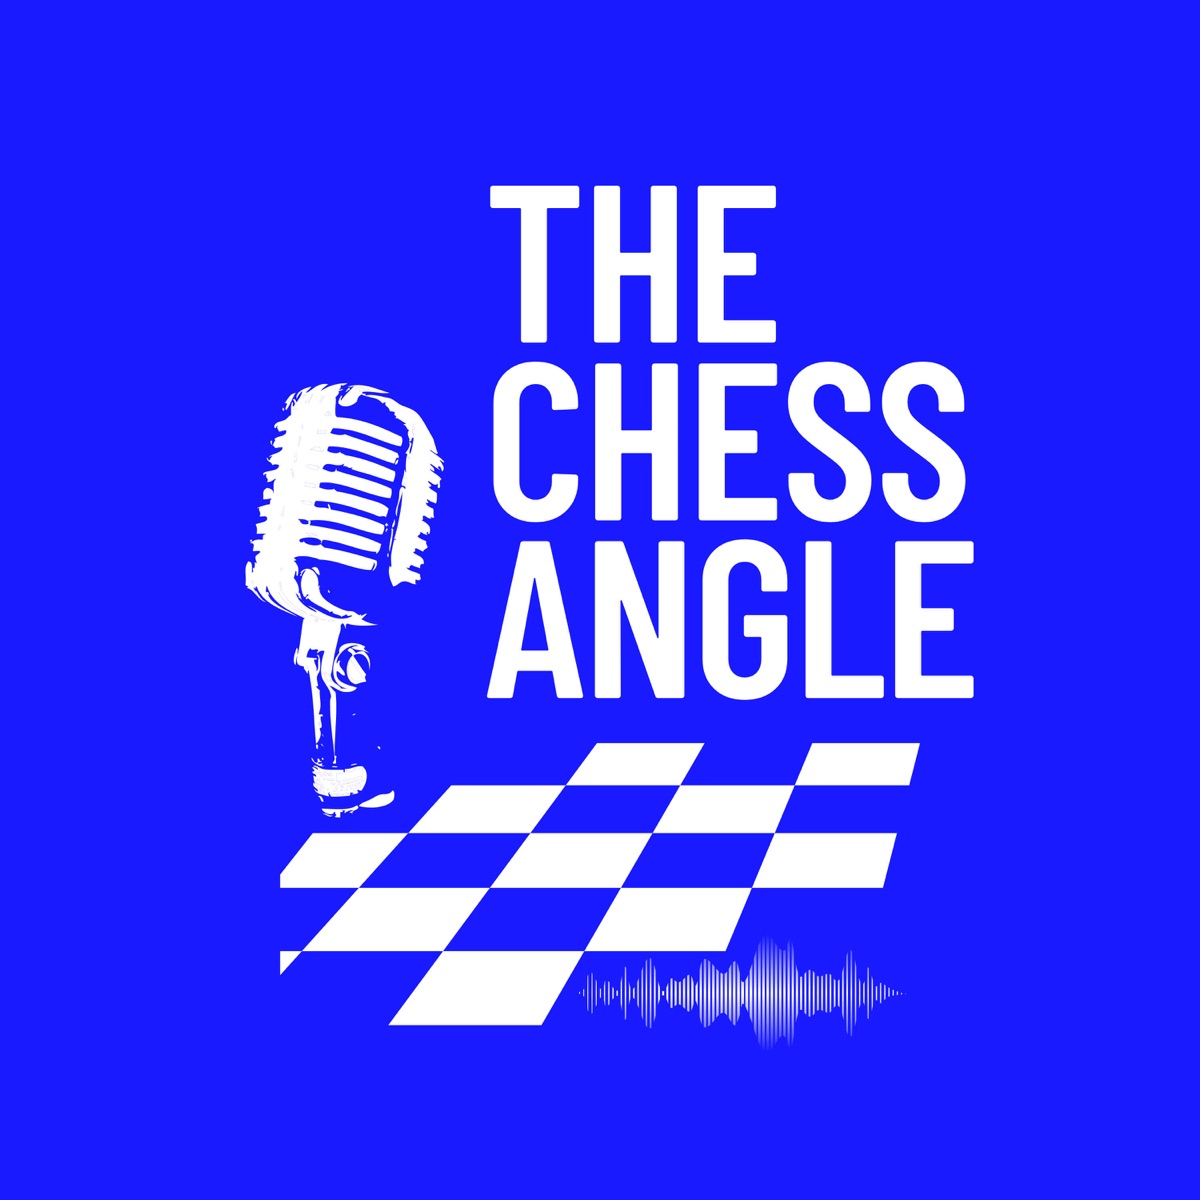 Blindfold Chess Podcast on Apple Podcasts